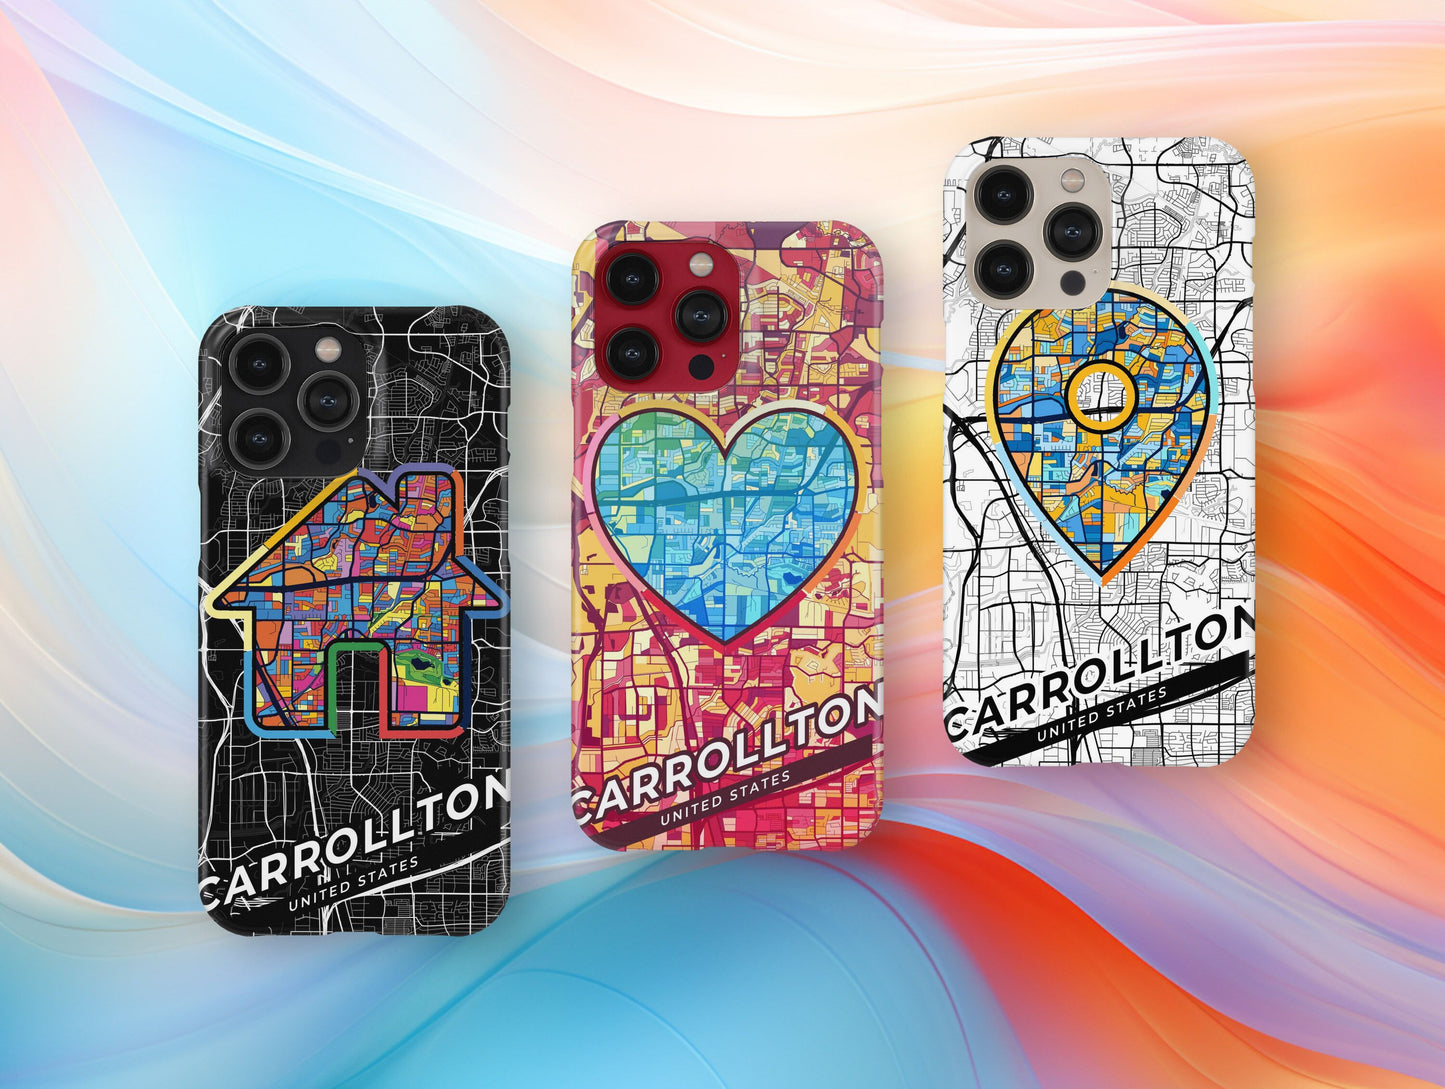 Carrollton Texas slim phone case with colorful icon. Birthday, wedding or housewarming gift. Couple match cases.